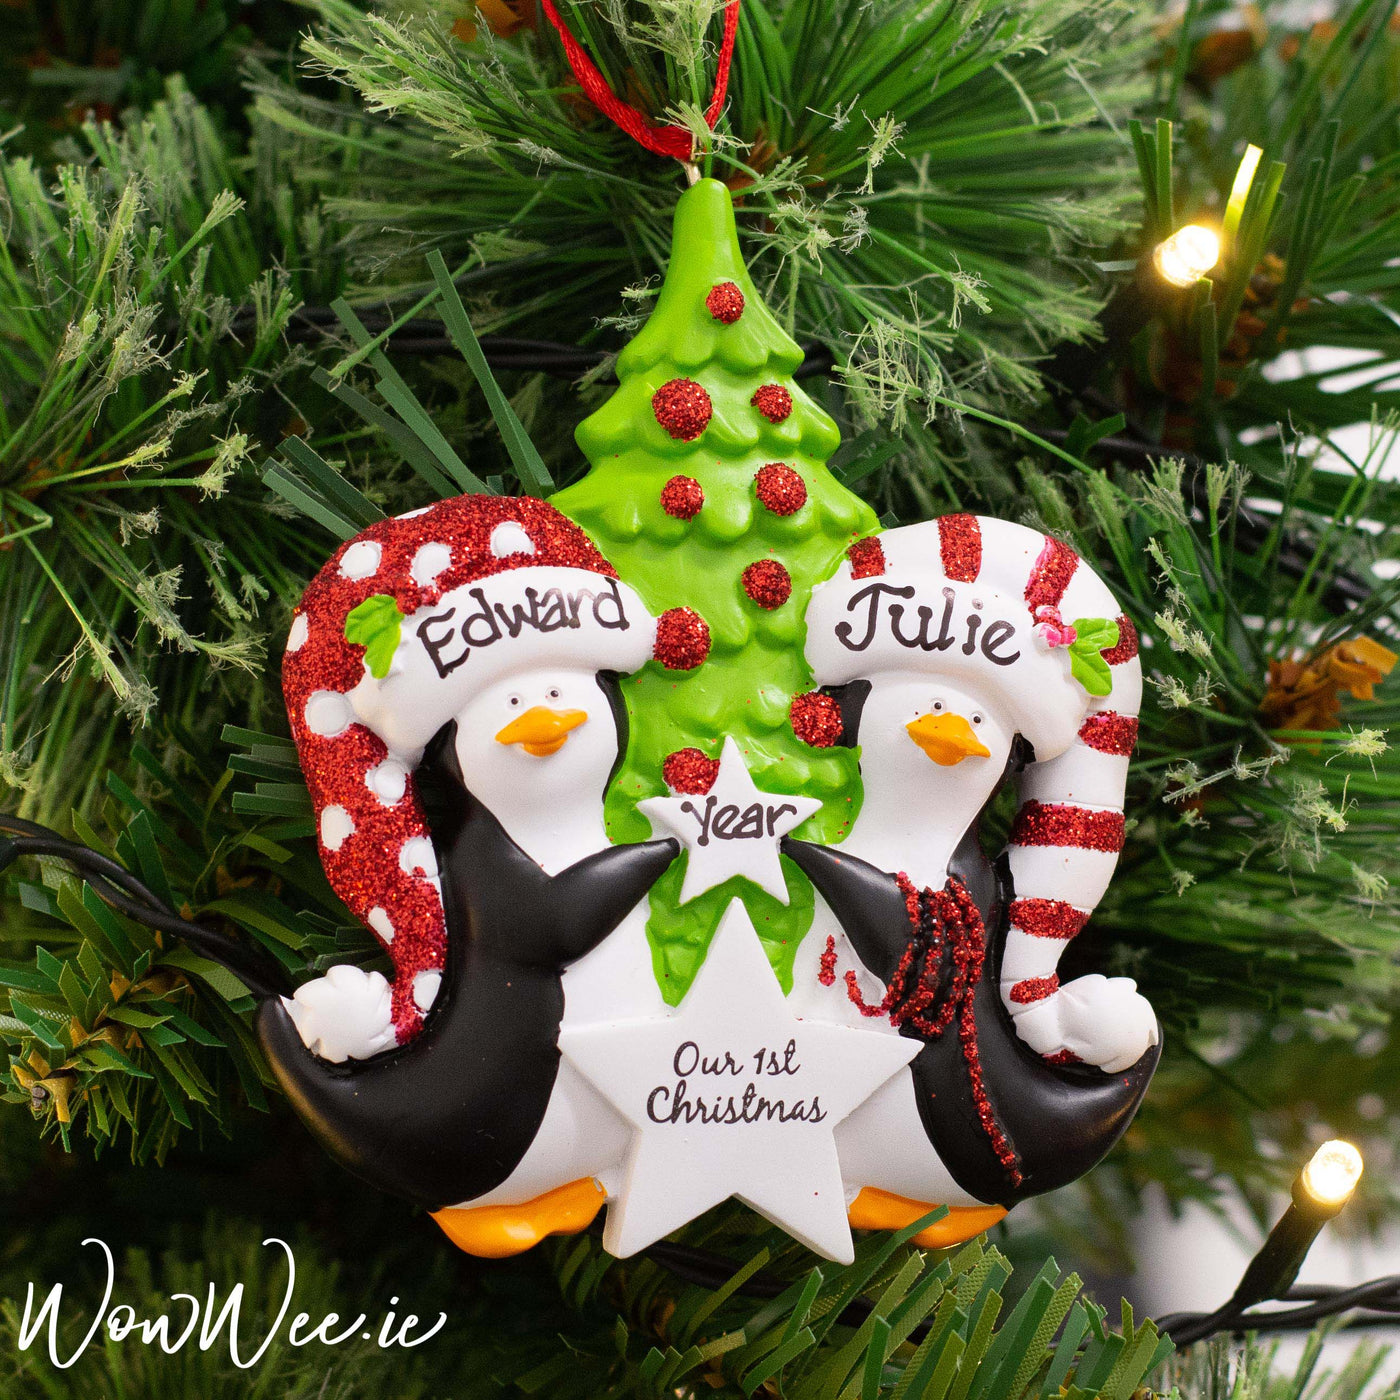 Personalised Christmas Ornament - Our 1st Christmas Together | Personalised Christmas Tree Decorations For Couples | WowWee.ie